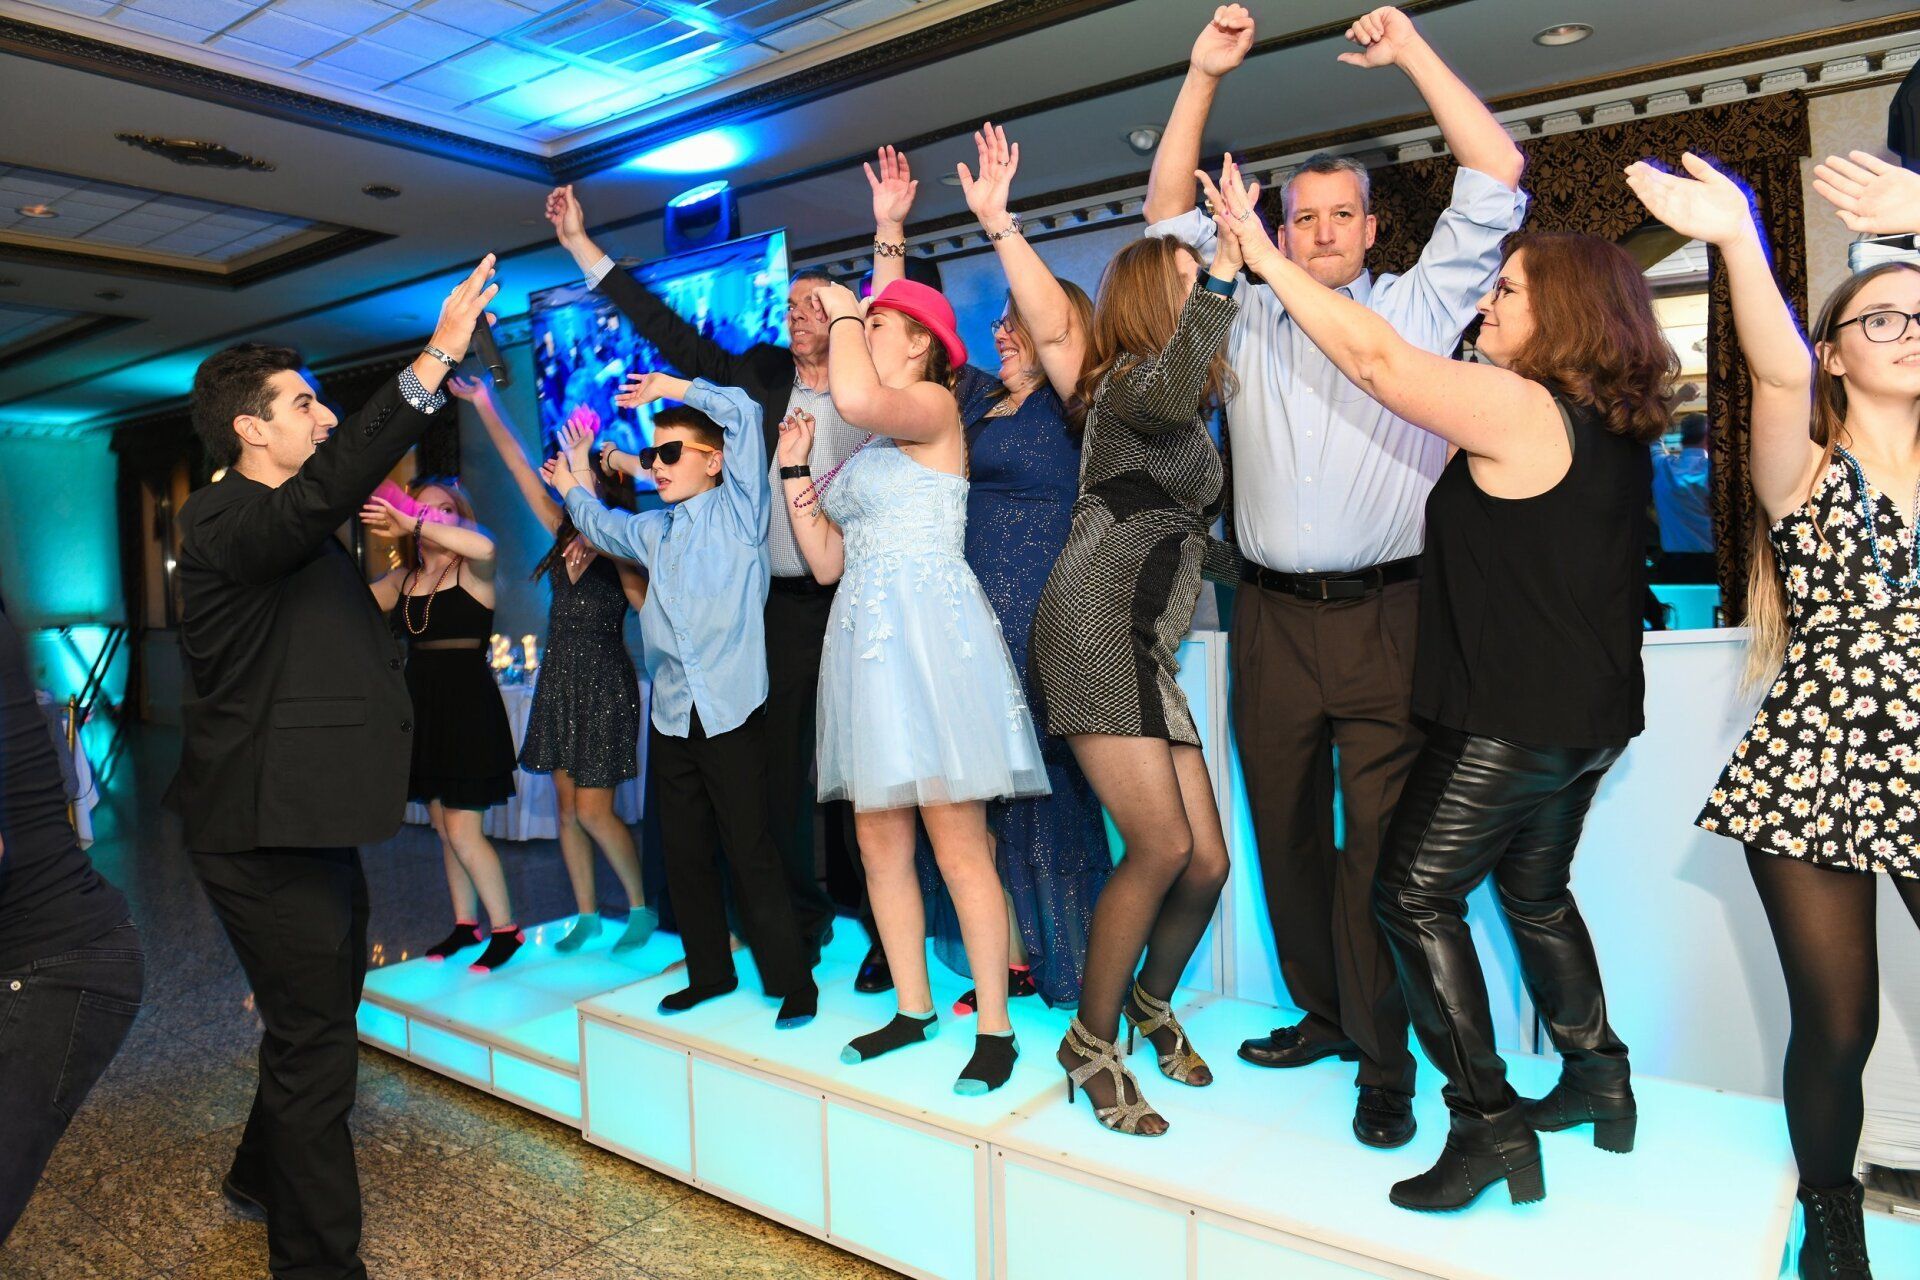 Bar Mitzvah guests dancing on LED DJ stage.